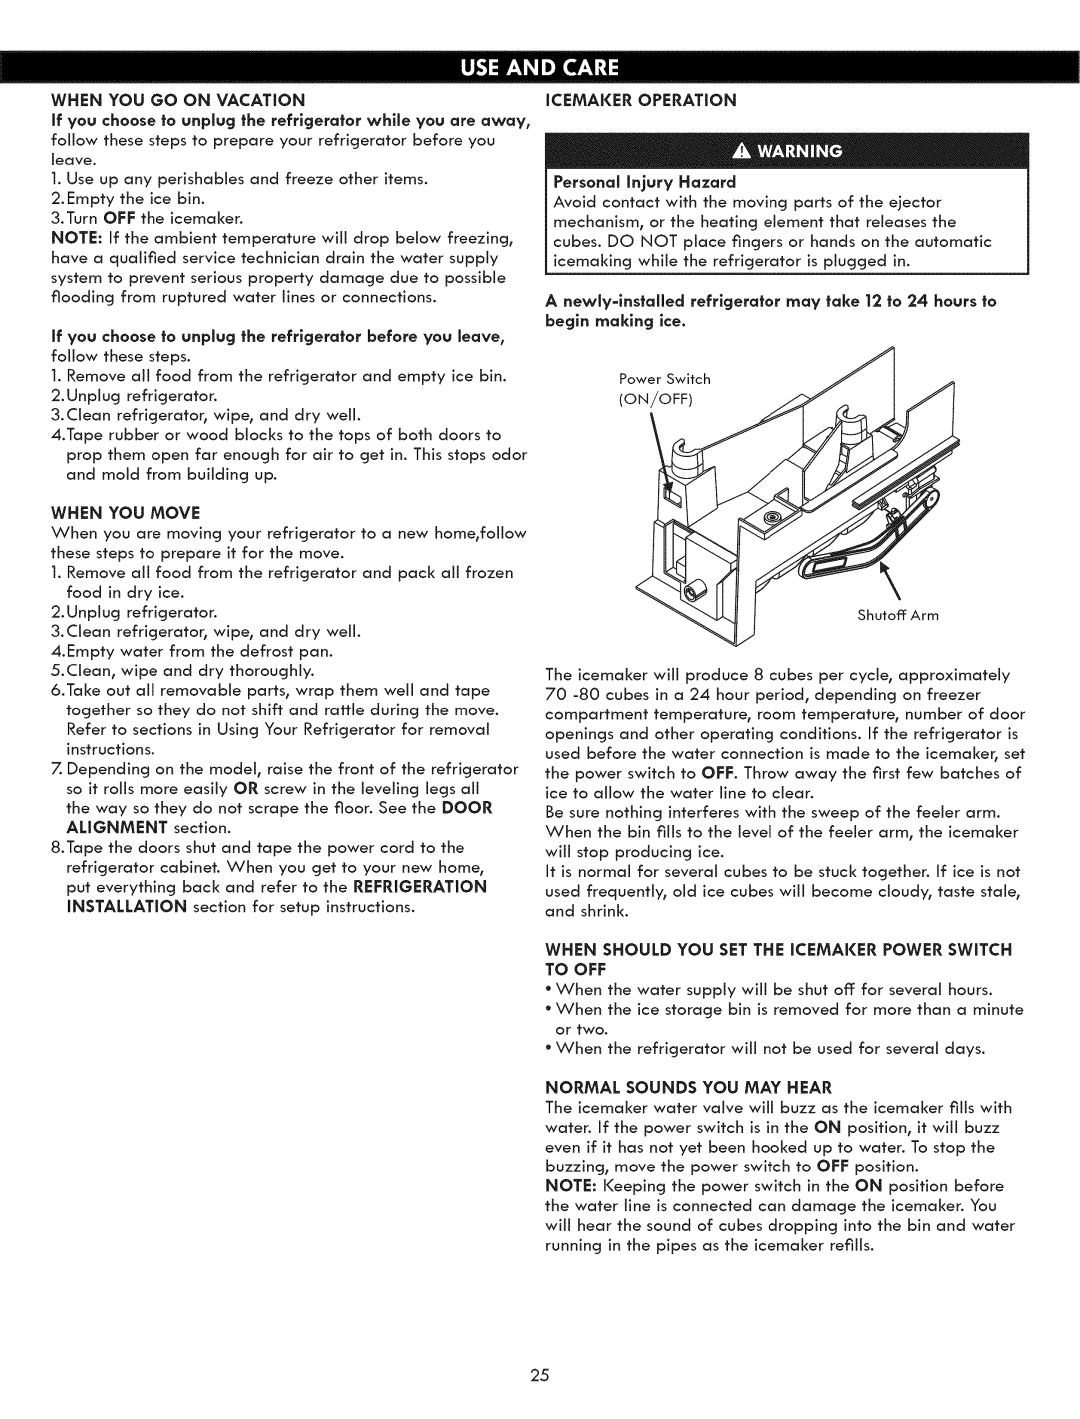 Kenmore 795.5131 manual When You Go On Vacation, When You Move, Icemaker Operation, Normal Sounds You May Hear 